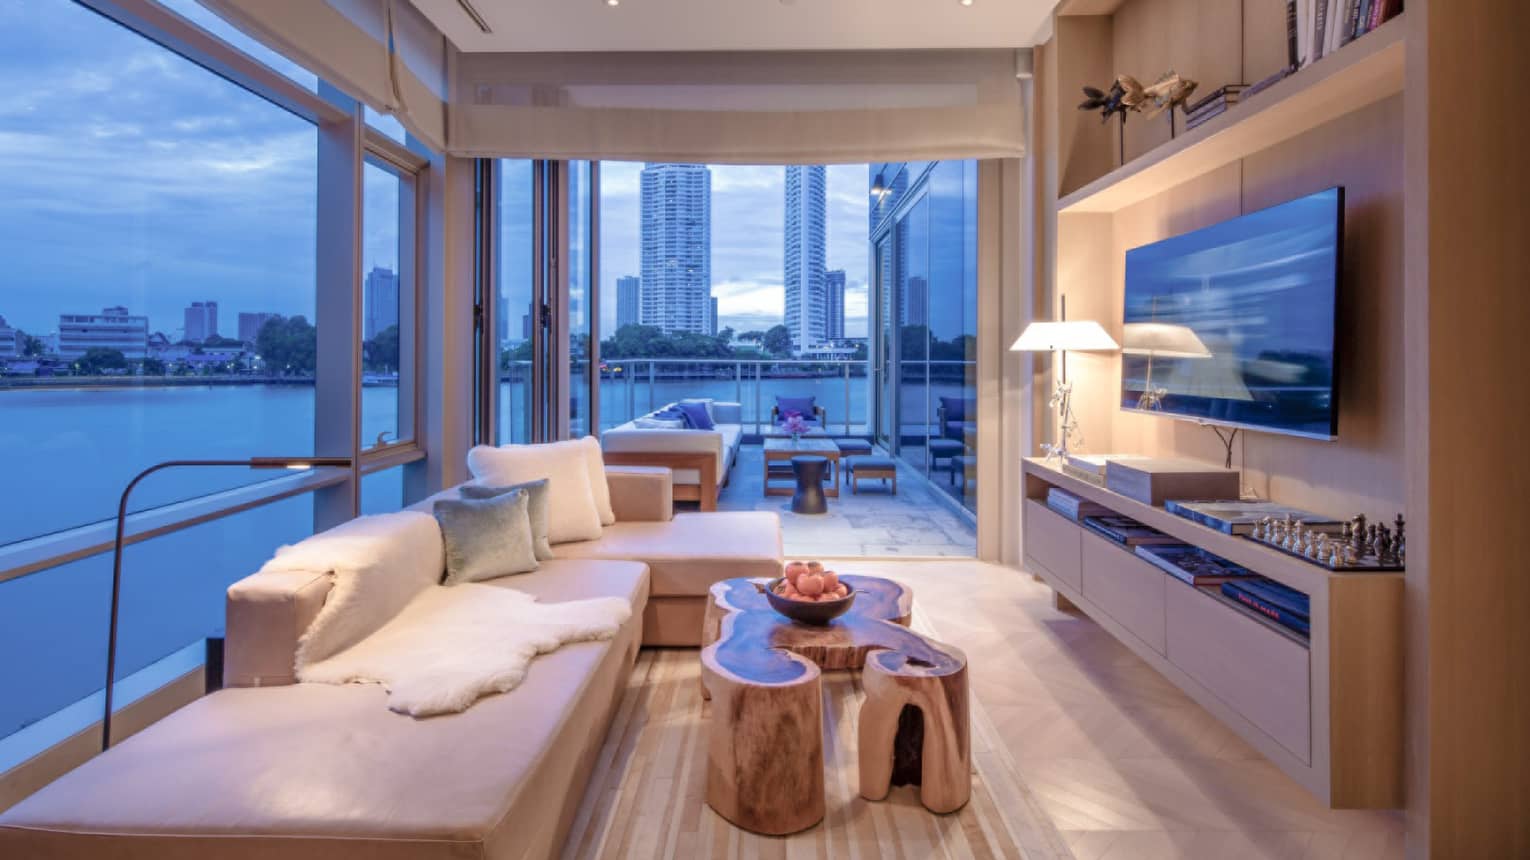 Living room with couch, coffee table and floor-to-ceiling windows with water and city view.